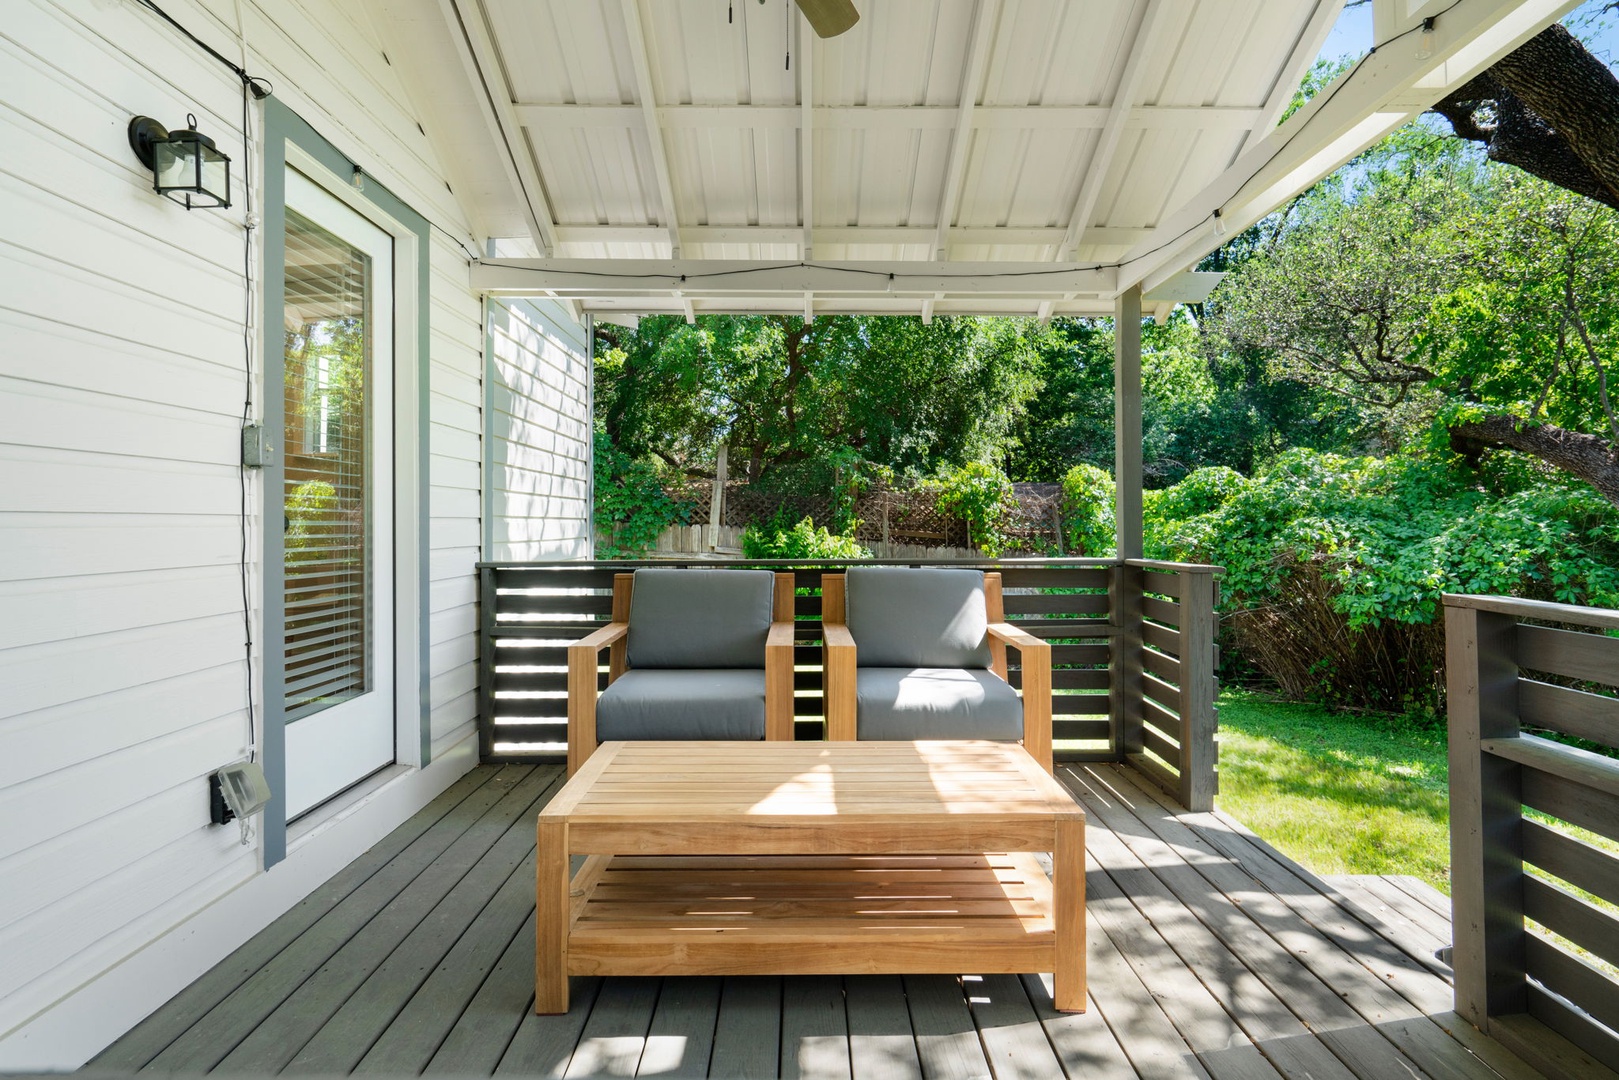 Unwind in the fresh air on the Studio’s shaded patio